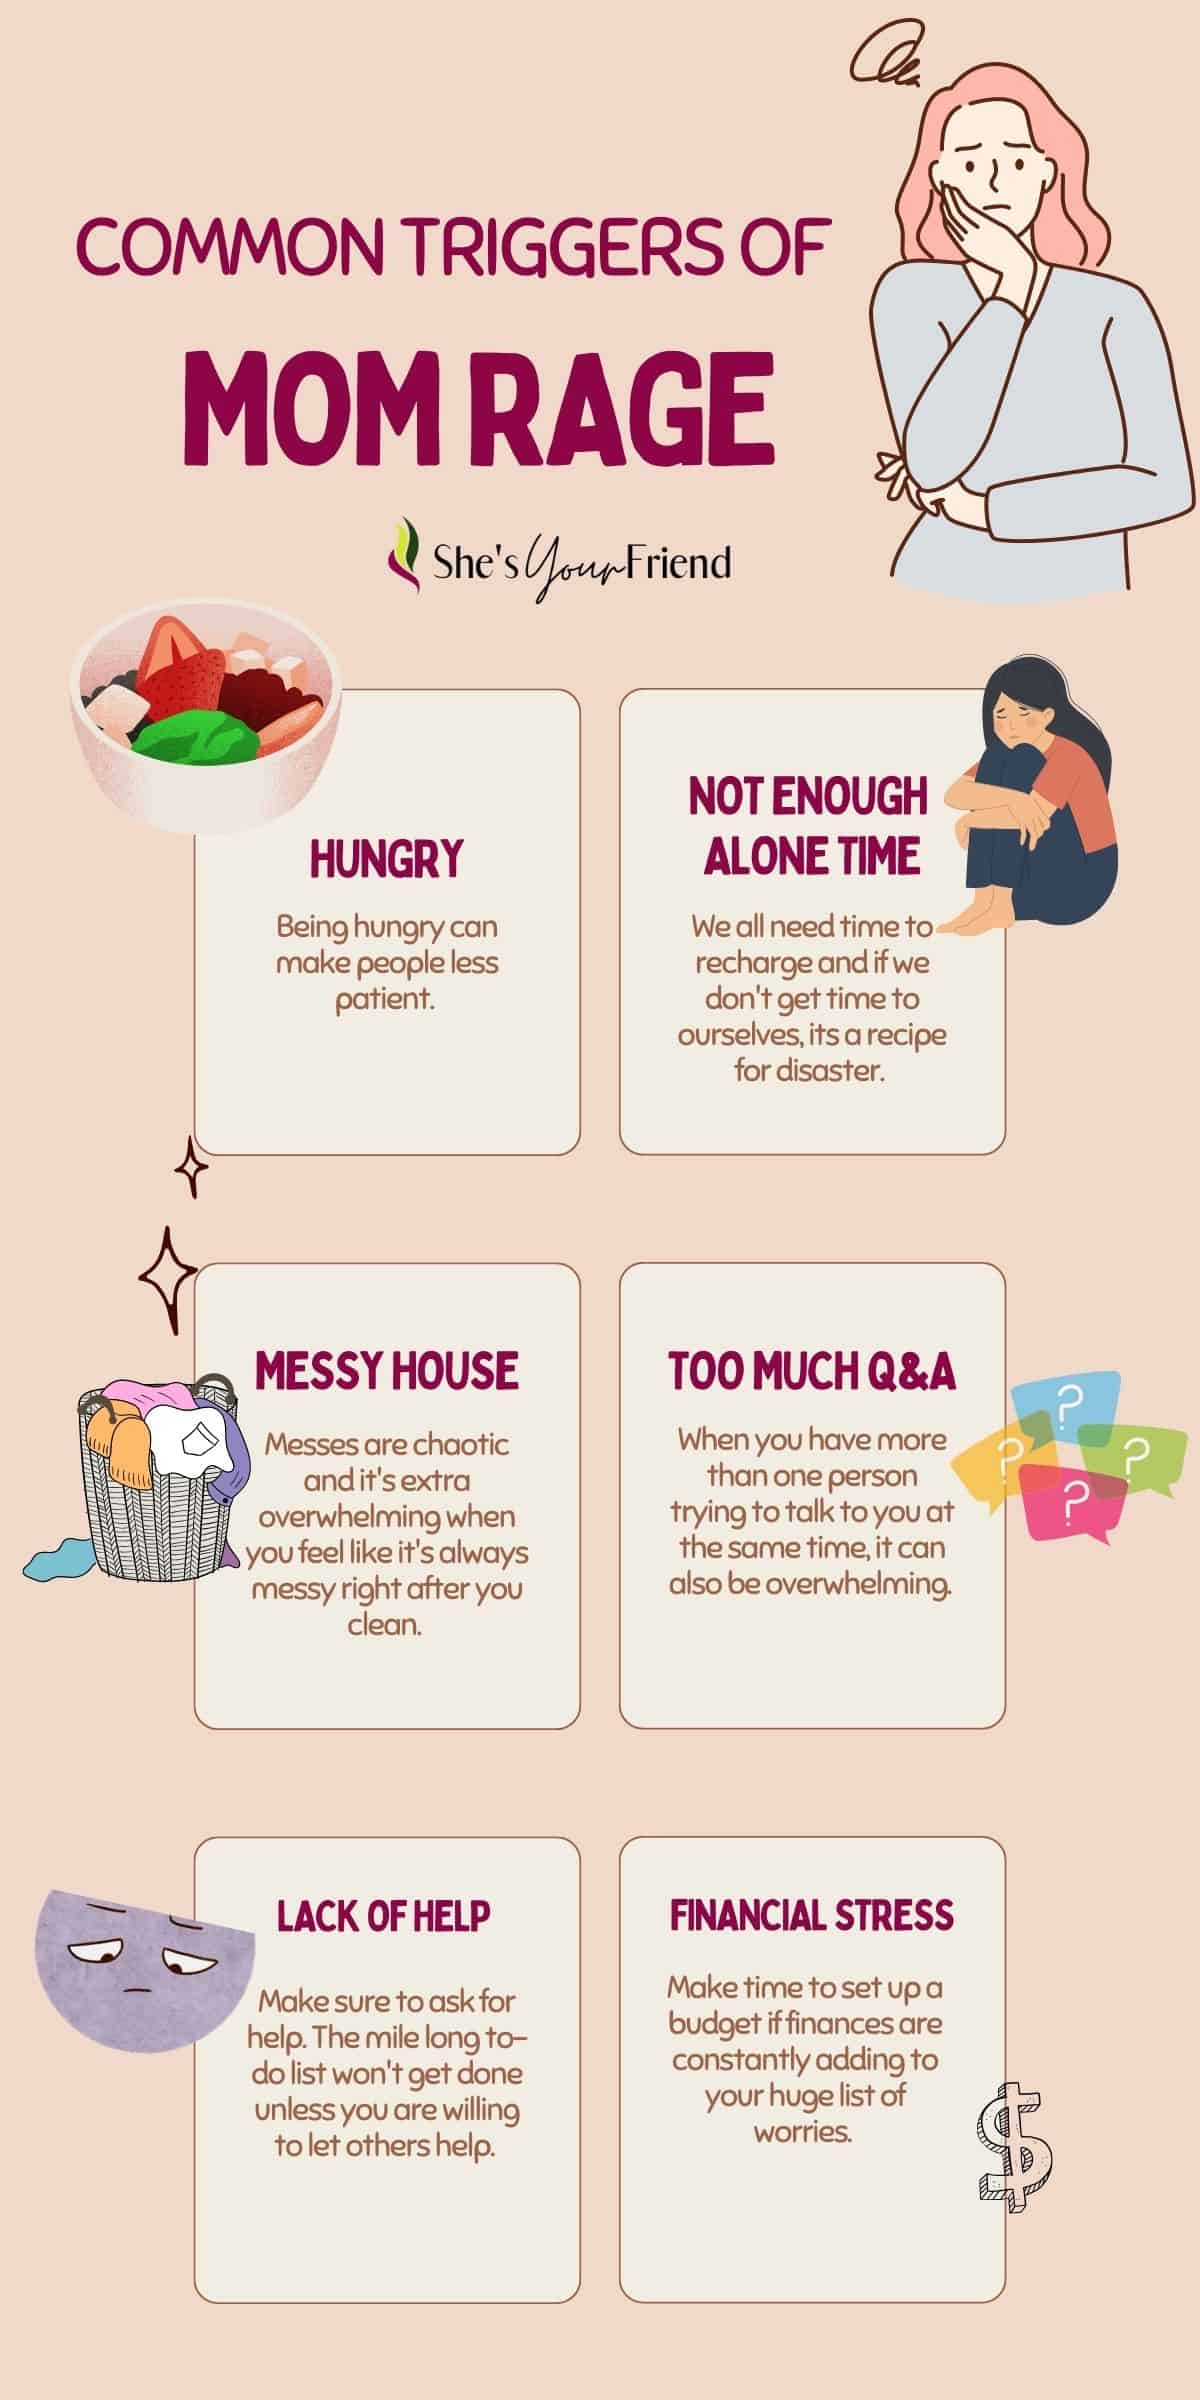 an infographic showing common triggers of mom rage including hungry not enough alone time messy house too much Q and A lack of help and financial stress